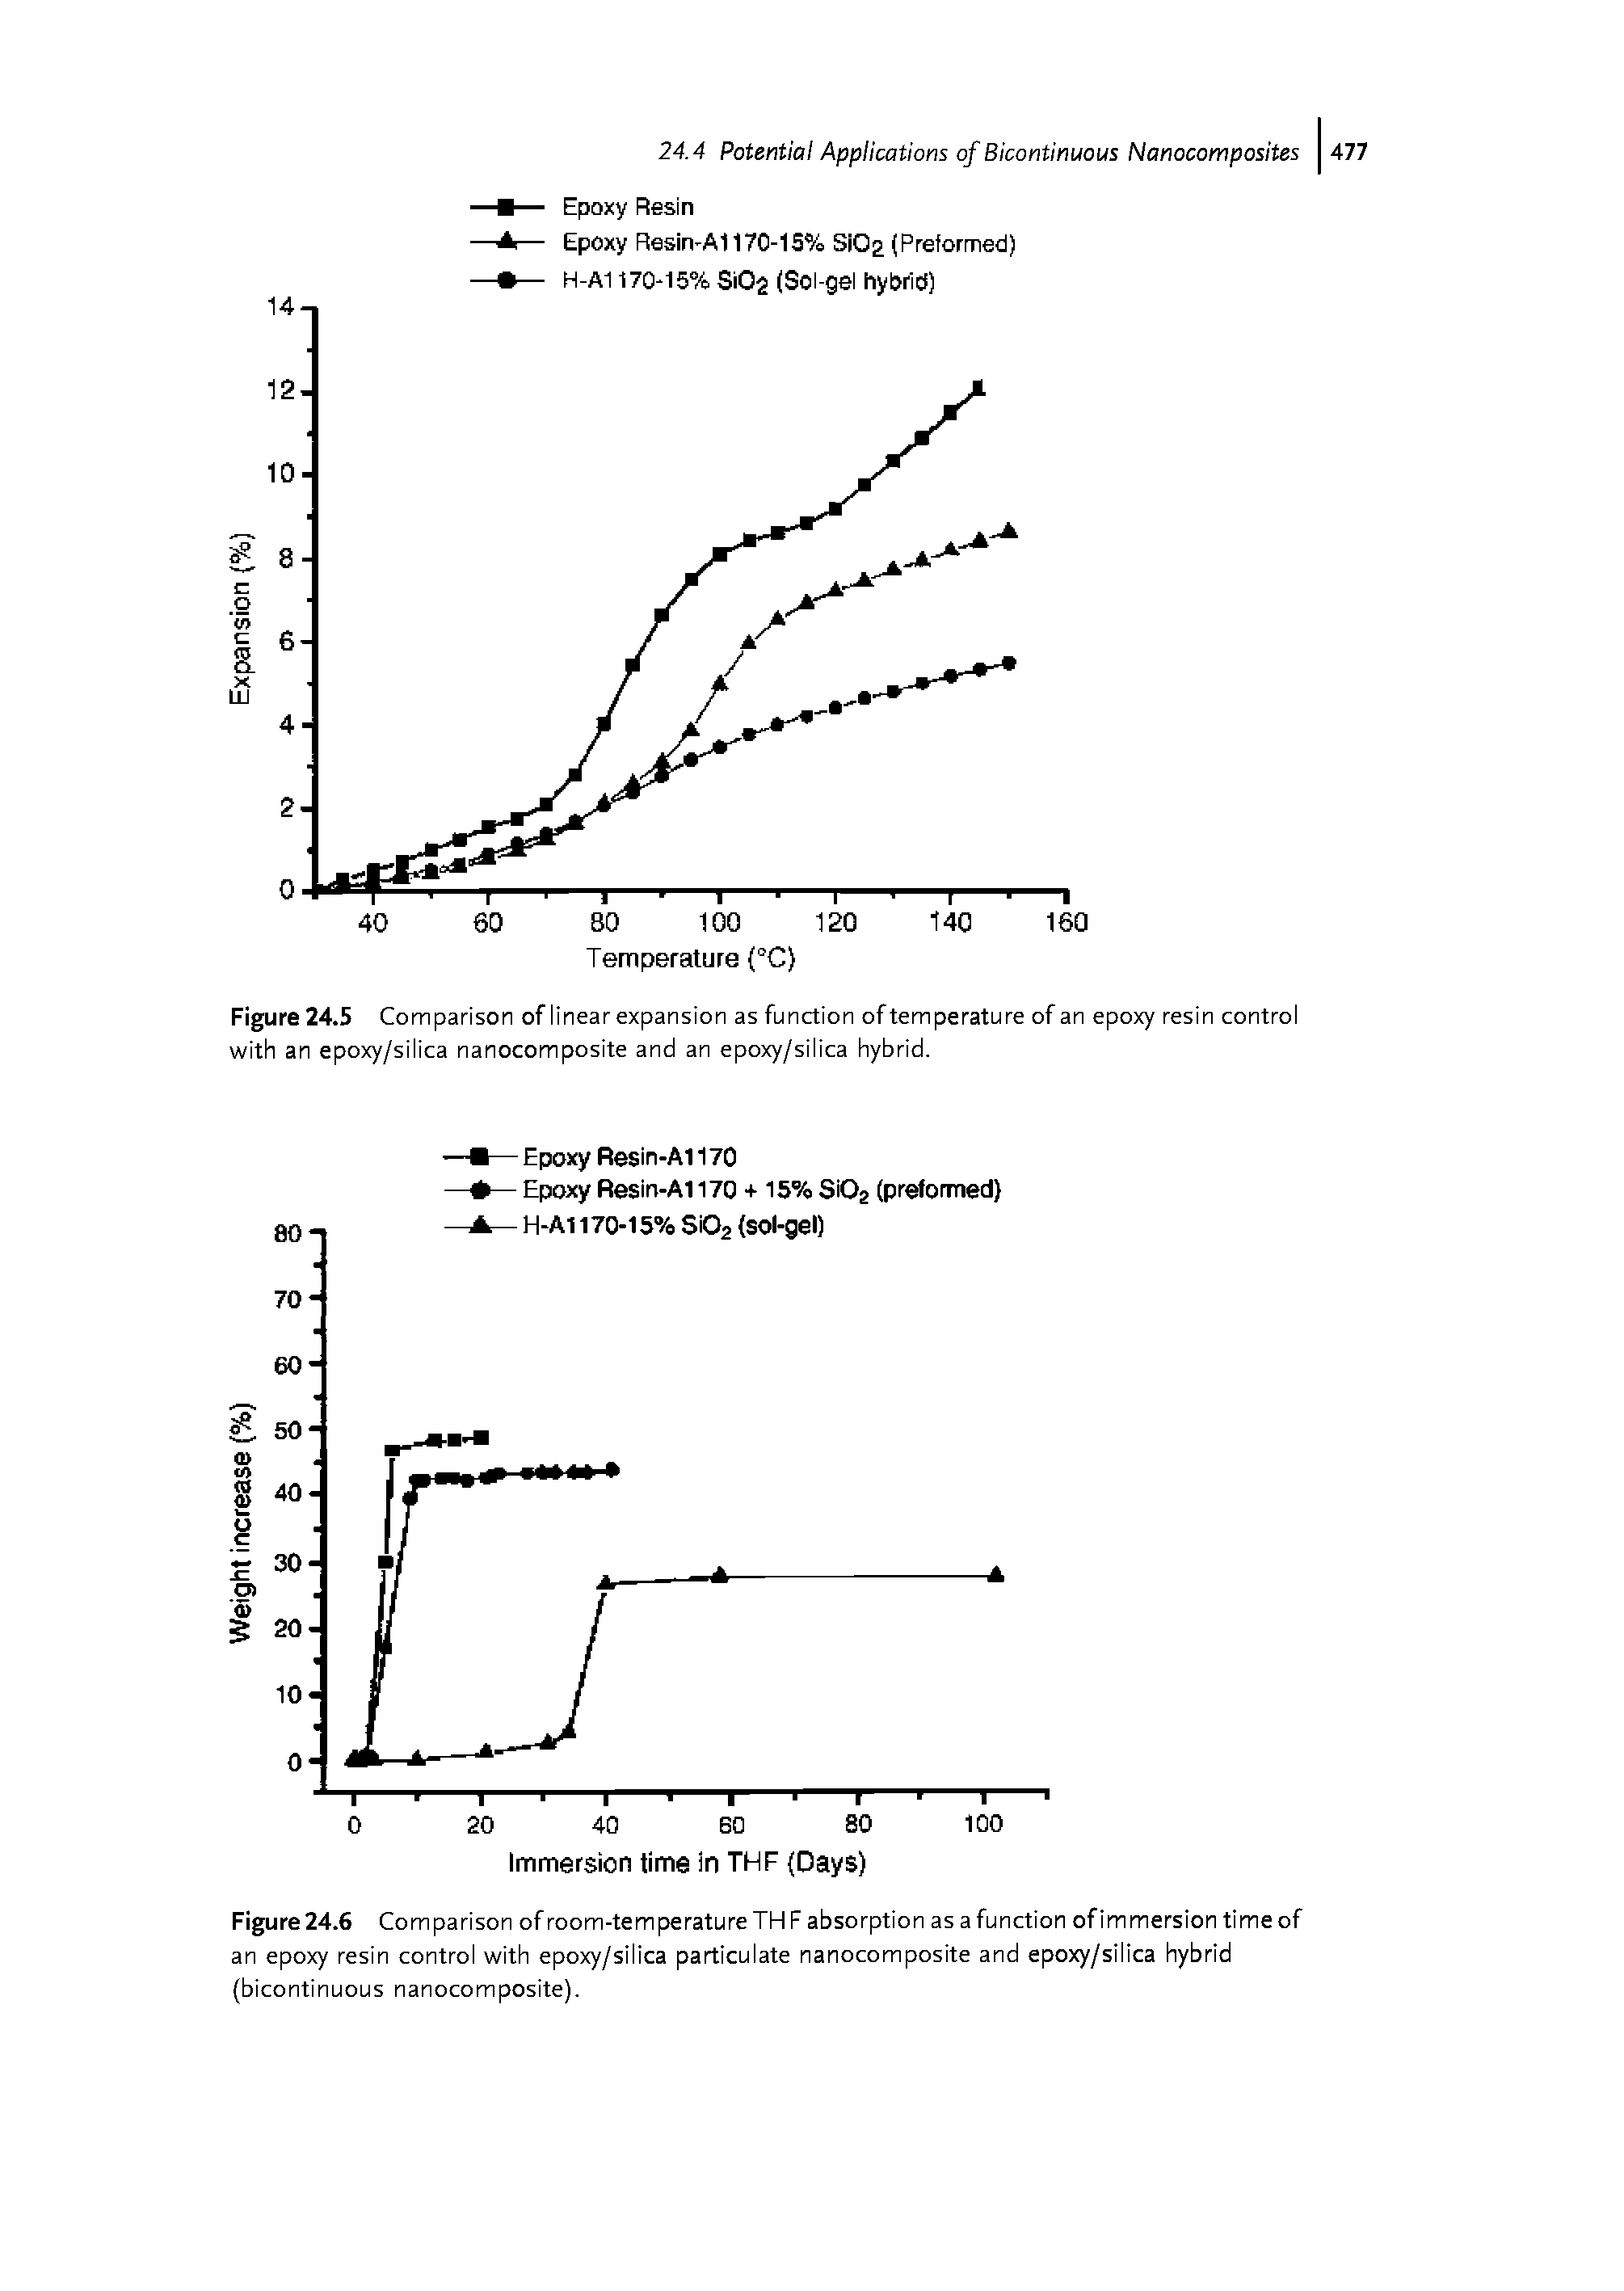 Figure 24.5 Comparison of linear expansion as function of temperature of an epoxy resin controi with an epoxy/silica nanocomposite and an epoxy/silica hybrid.